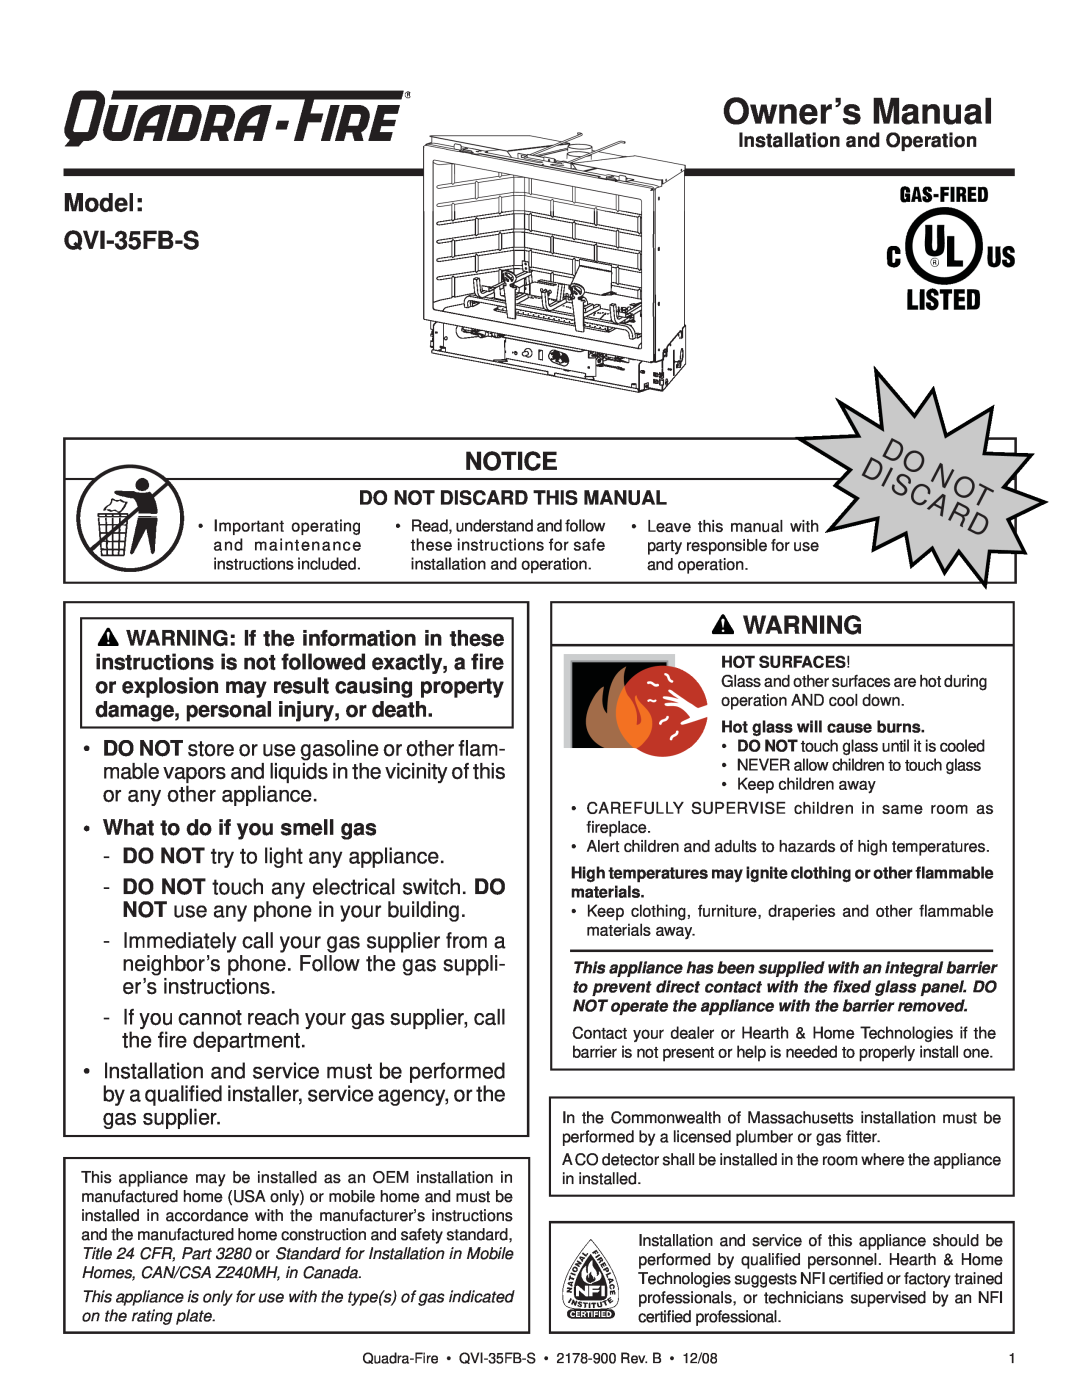 Quadra-Fire owner manual Model QVI-35FB-S, What to do if you smell gas 